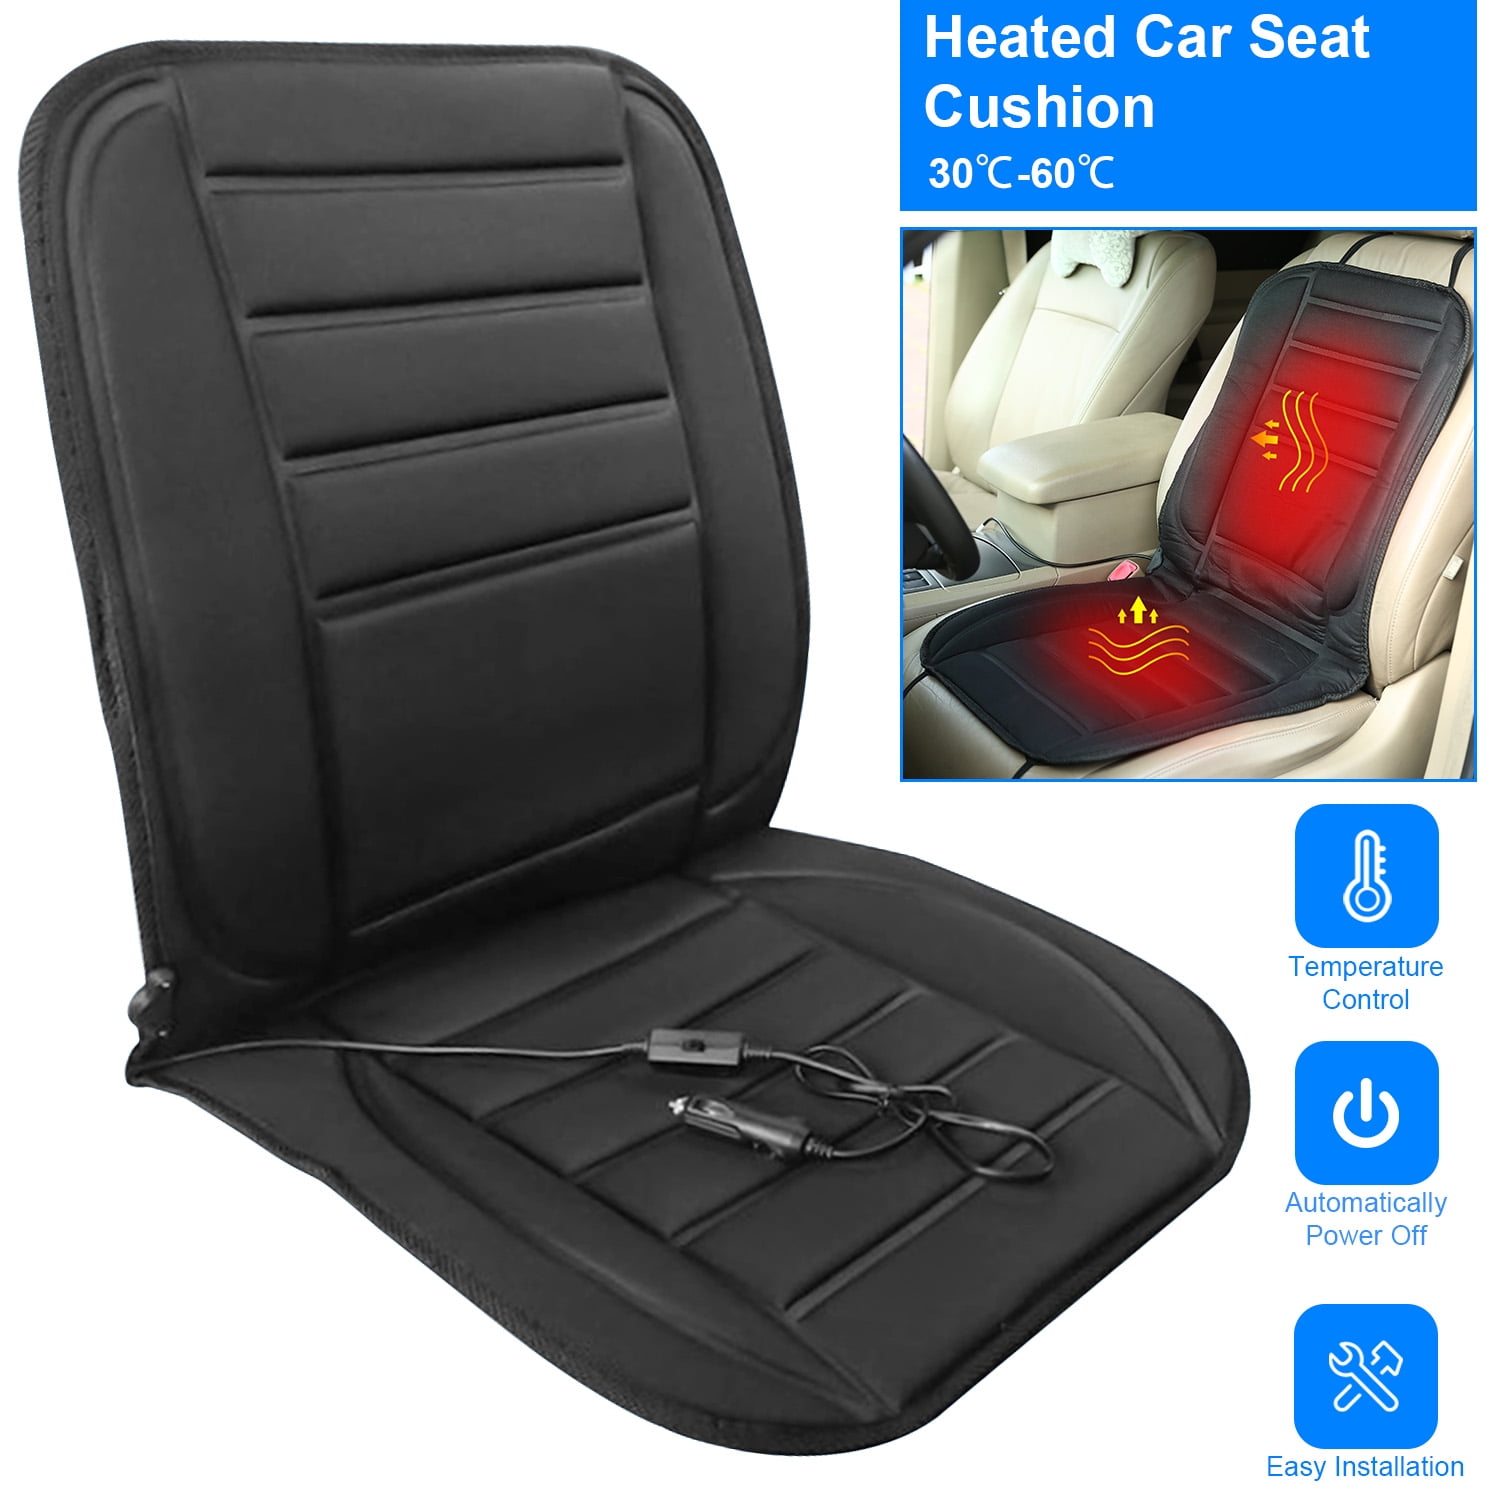 Universal Car heated Seat Cushion Pad Cover Warmer Adjustable Temperature Blue 